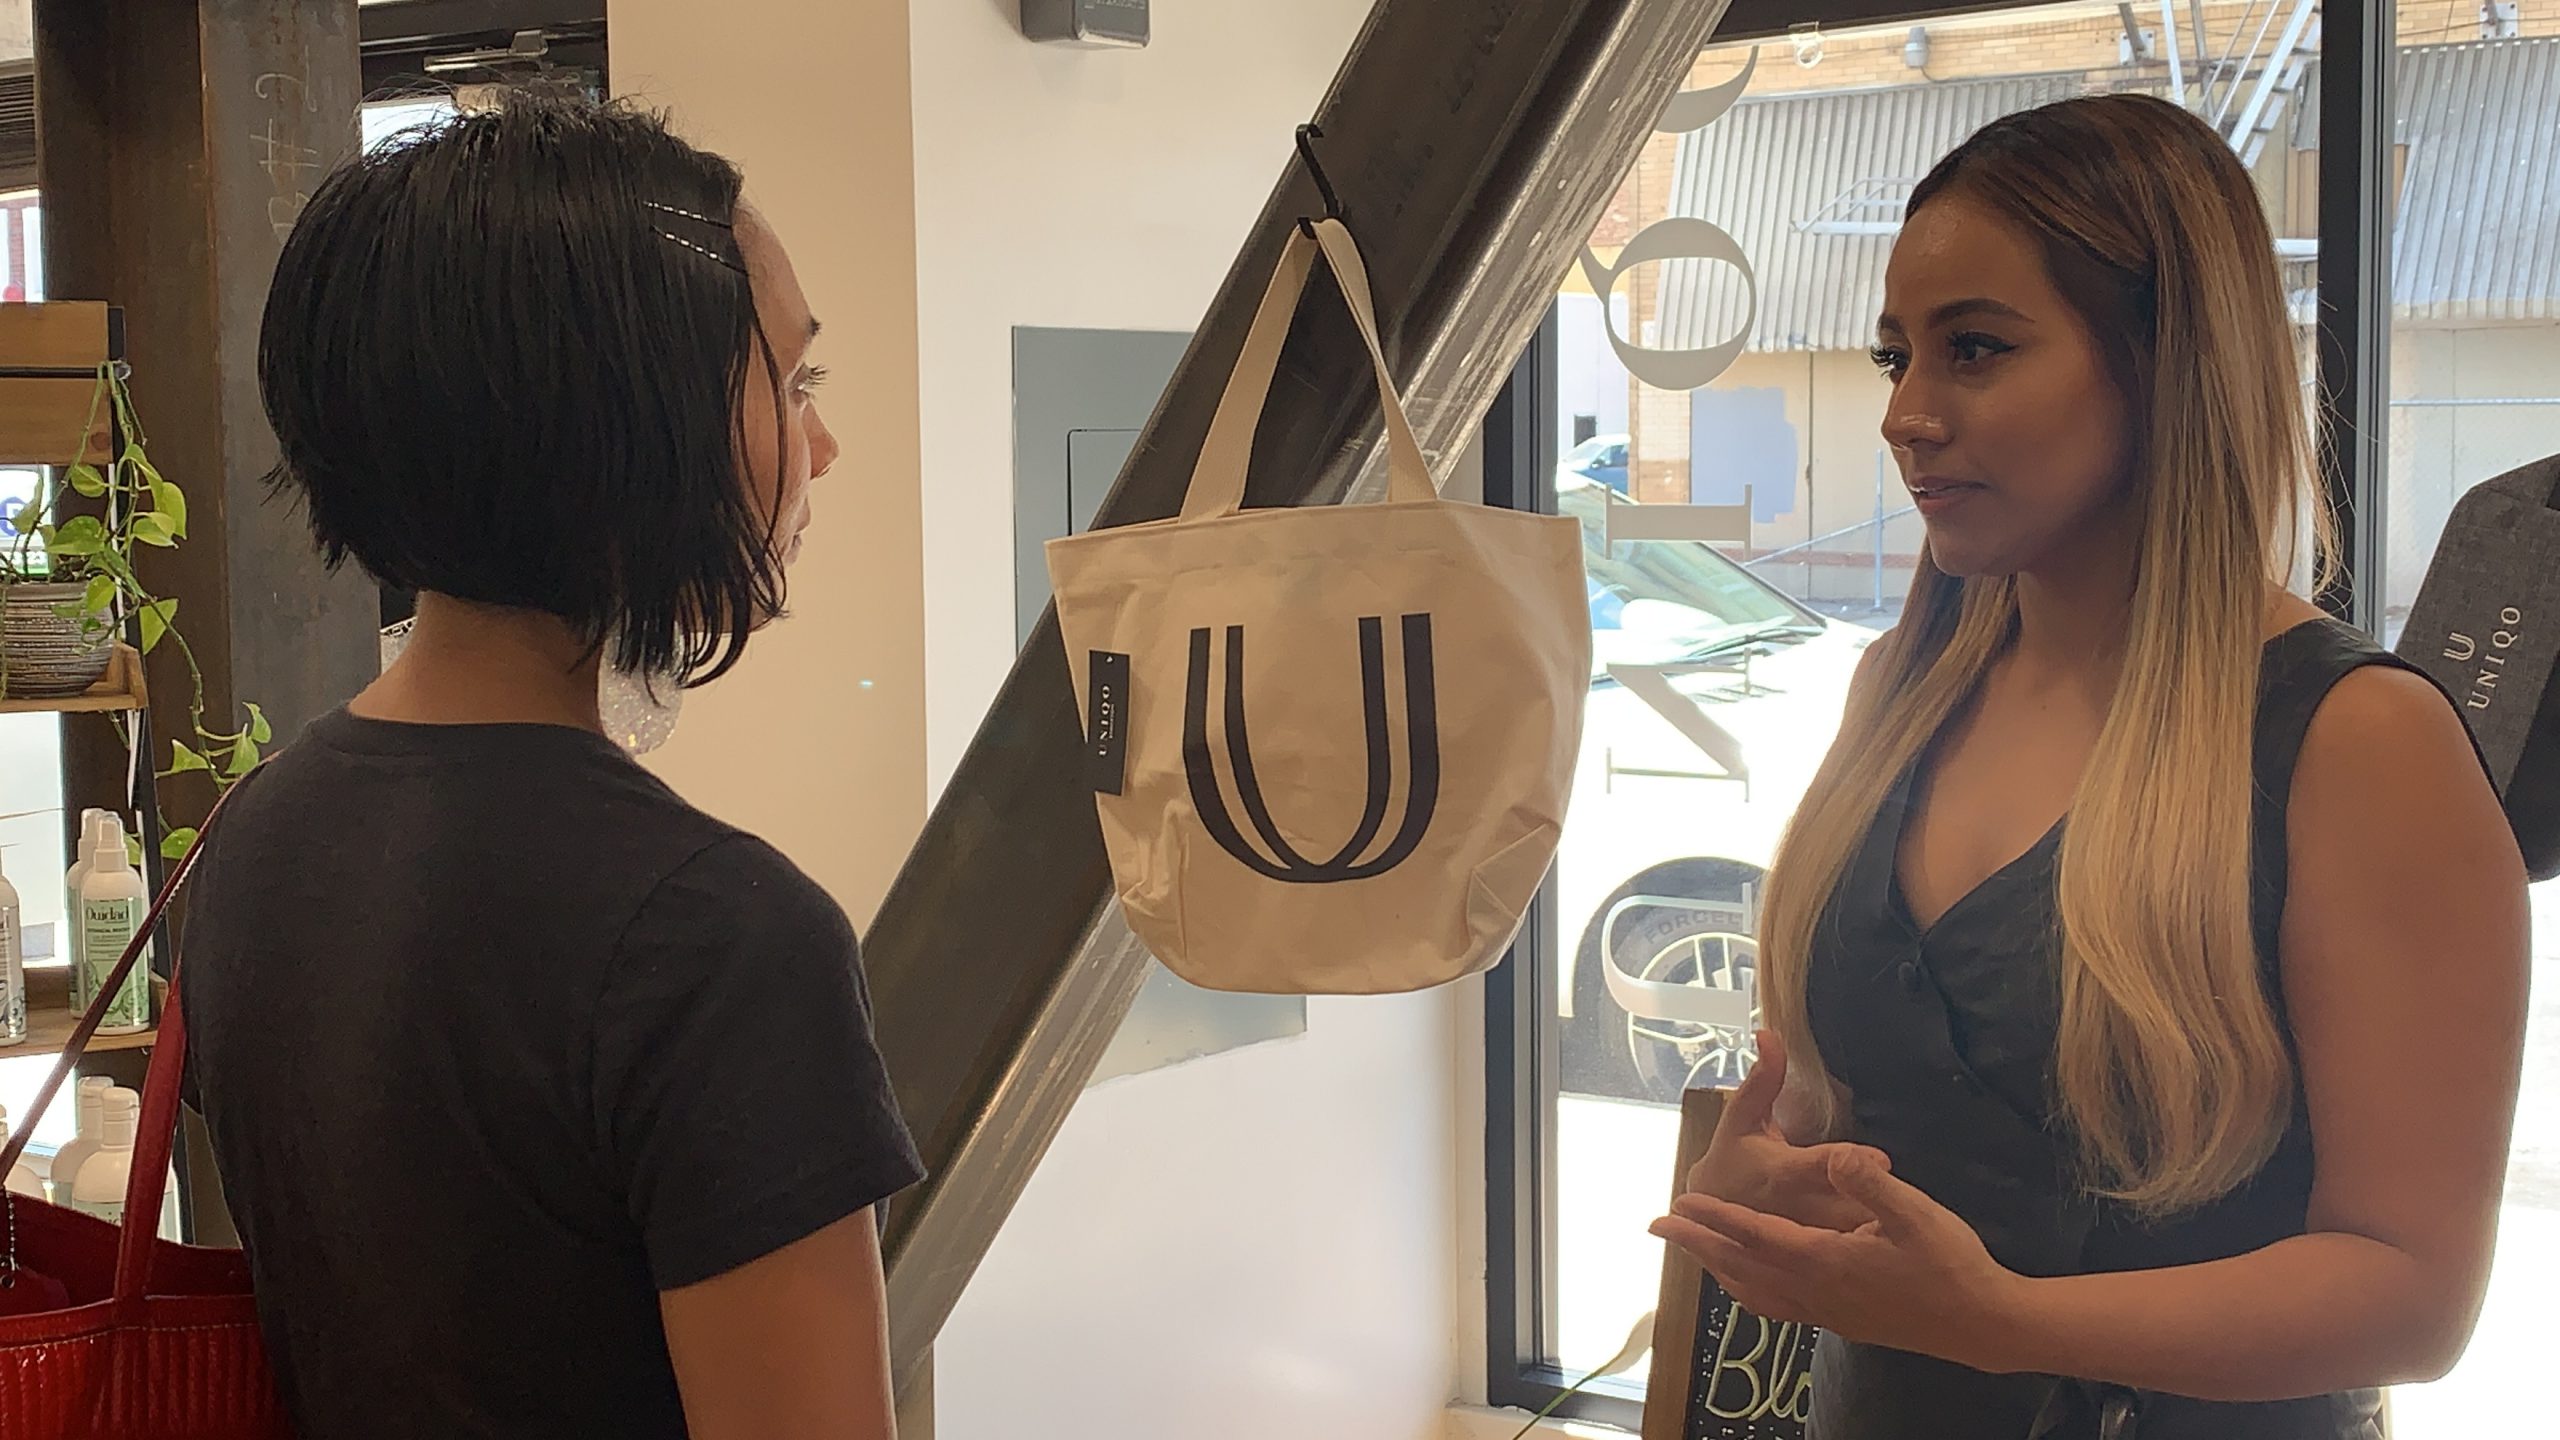 Patty Ayala, owner of Uniqo Salon, speaking with performer and entrepreneur, Renee Icasiano.
